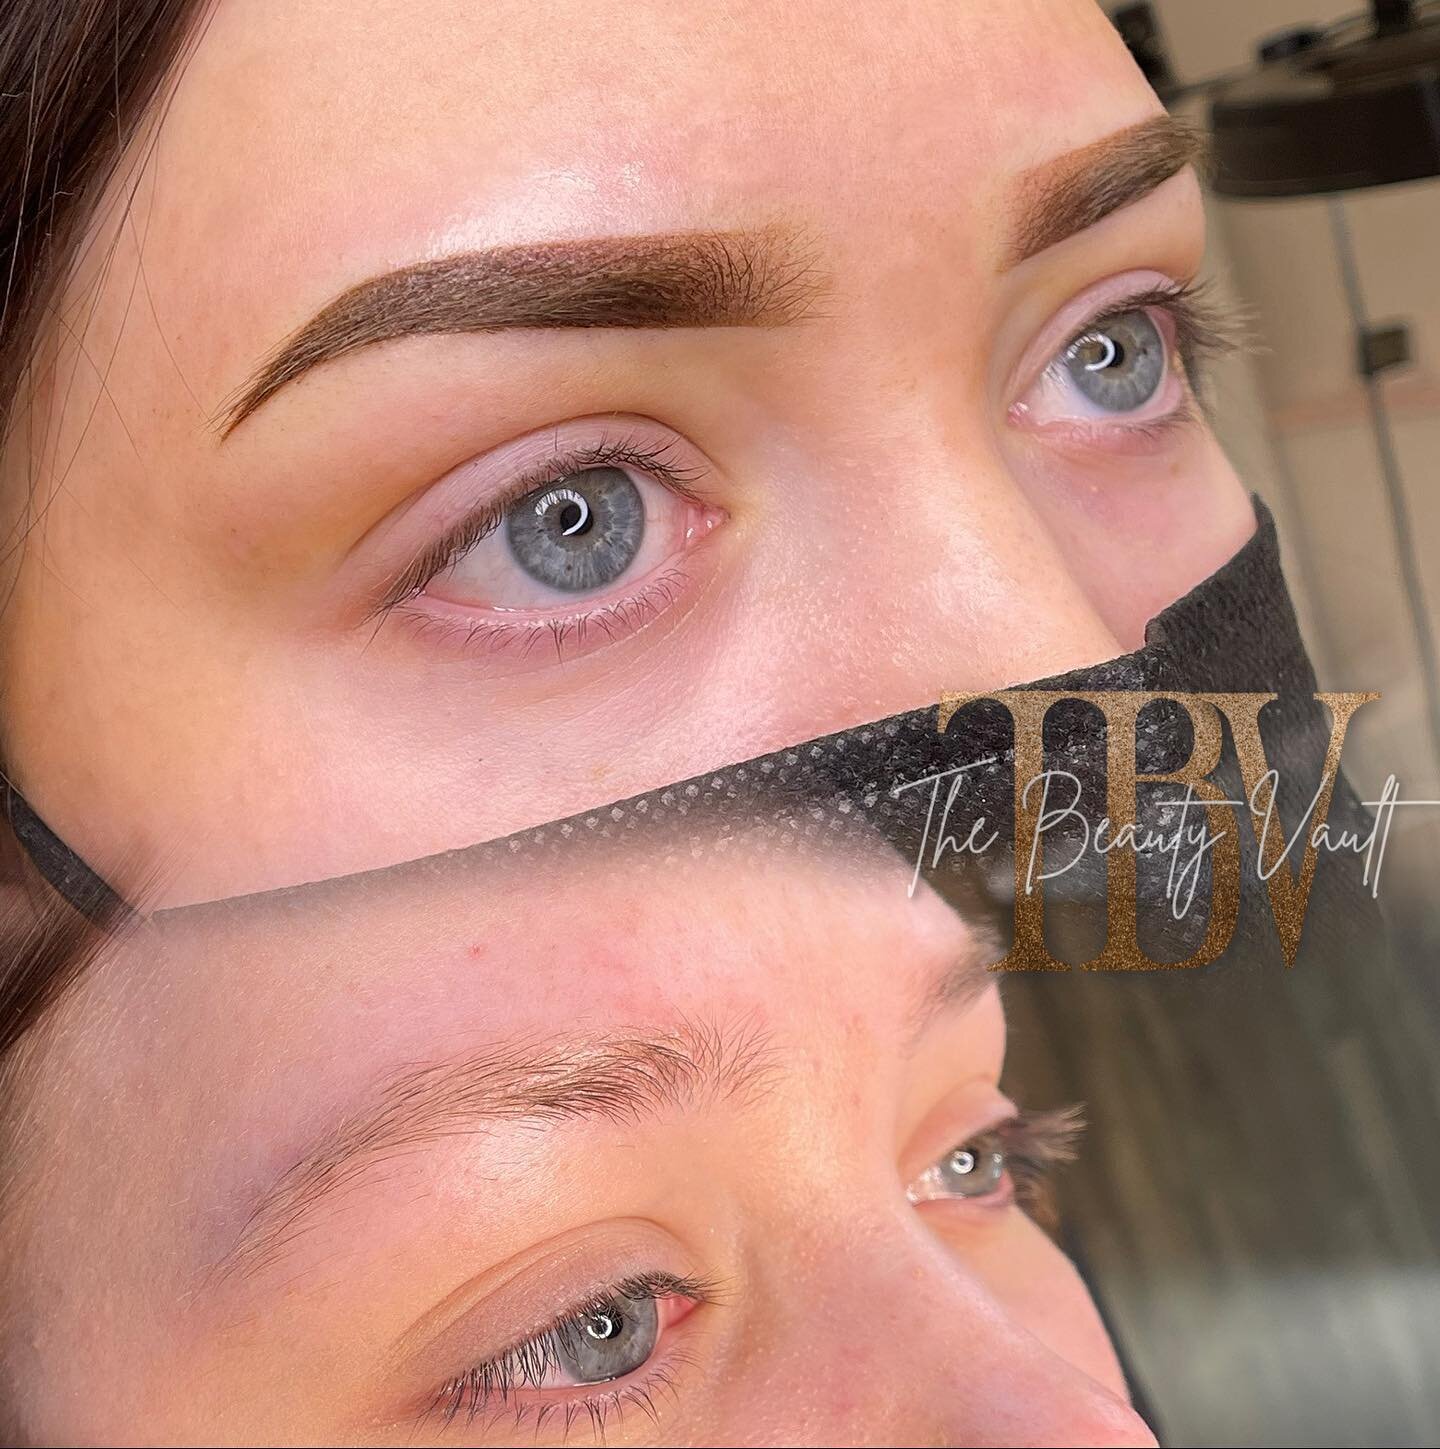 Here are the close ups of the brows I posted earlier🤩 
 Swipe to see what the healed result from the first session was! 

As always, using @browdaddy dark teddy+shockolade +Tokyo black